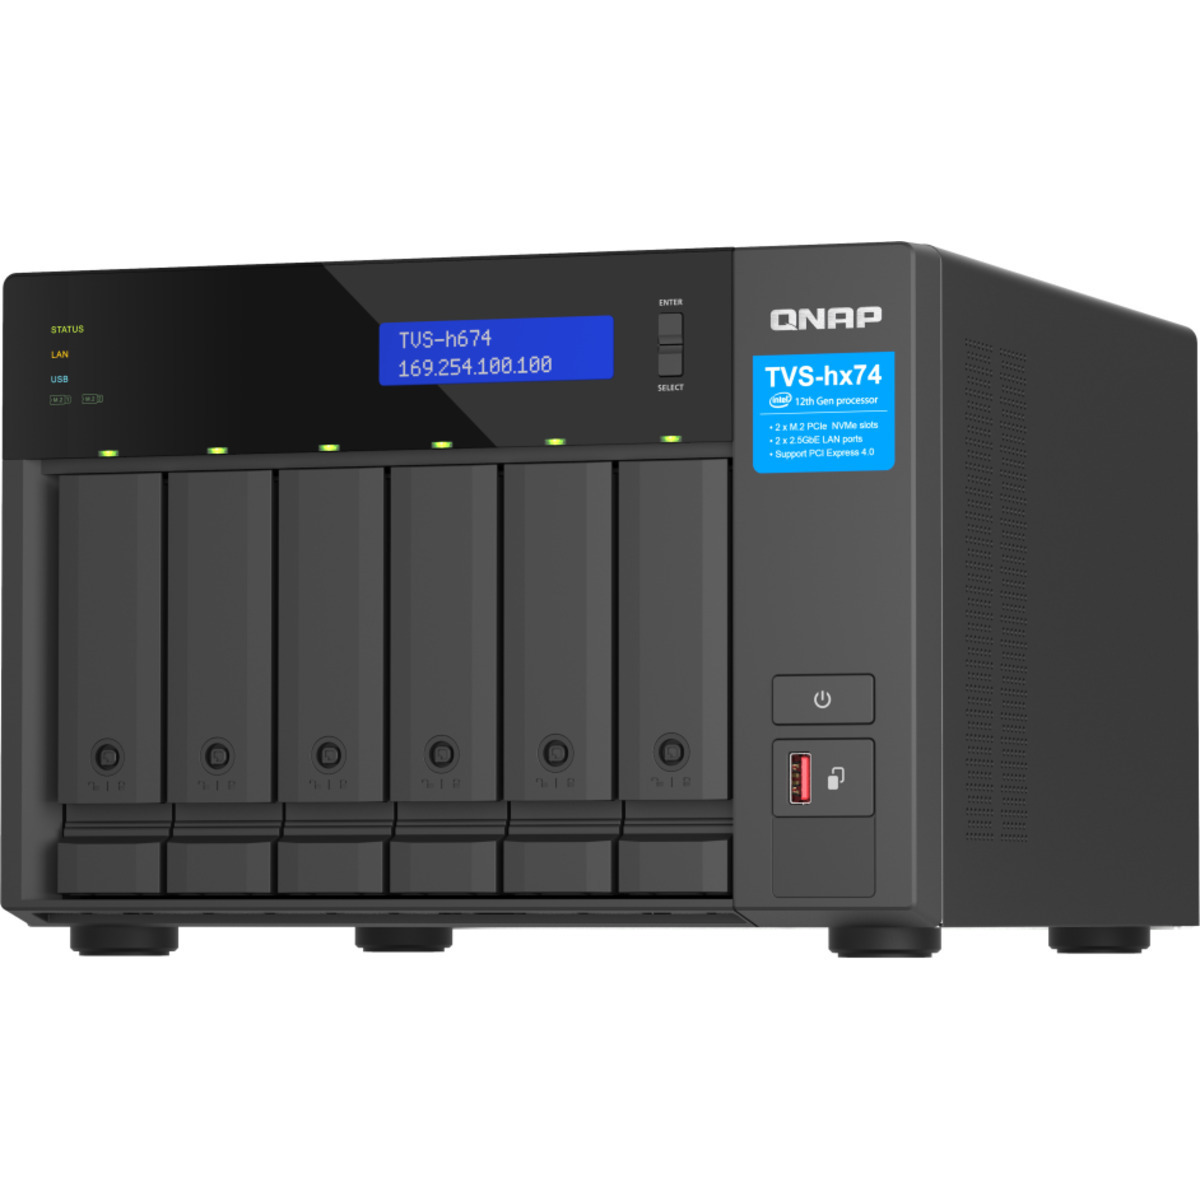 buy $2619 QNAP TVS-h674 Core i5 24tb Desktop NAS - Network Attached Storage Device 6x4000gb Toshiba MN Series MN08ADA400E 3.5 7200rpm SATA 6Gb/s HDD NAS Class Drives Installed - Burn-In Tested - ON SALE - nas headquarters buy network attached storage server device das new raid-5 free shipping simply usa TVS-h674 Core i5